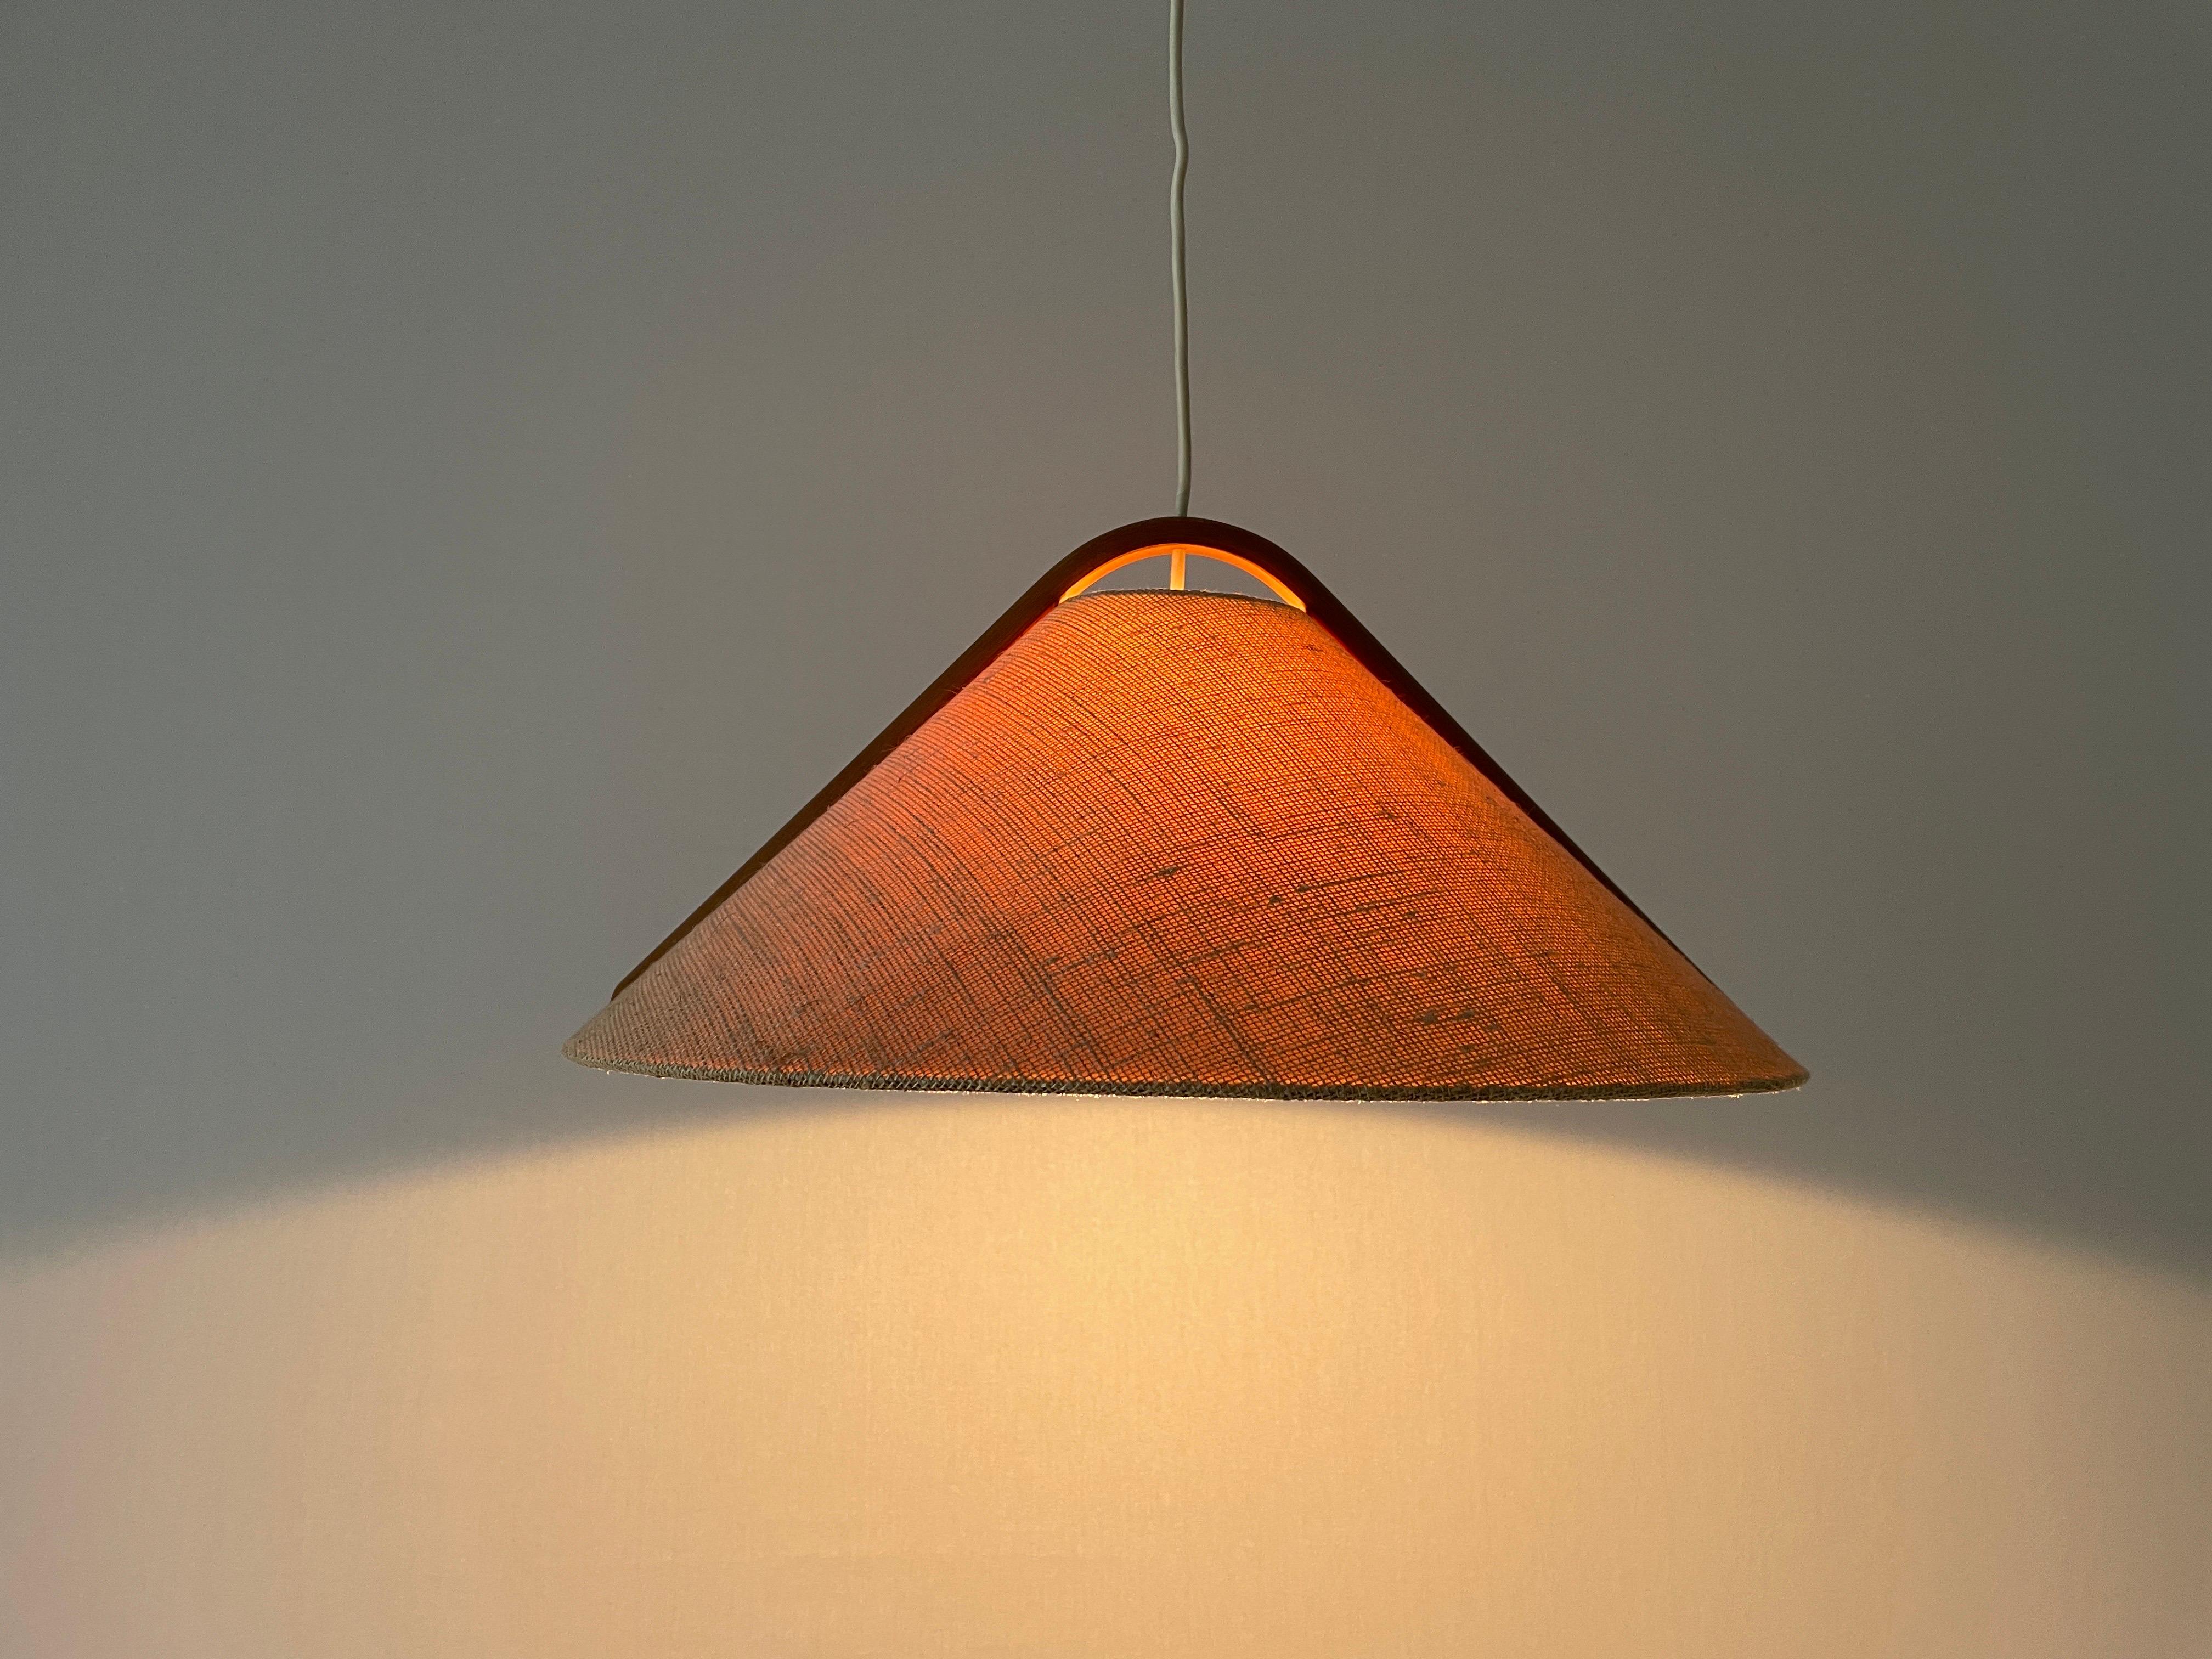 Conic Design Fabric Pendant Lamp with Teak Detail, 1960s, Germany For Sale 7